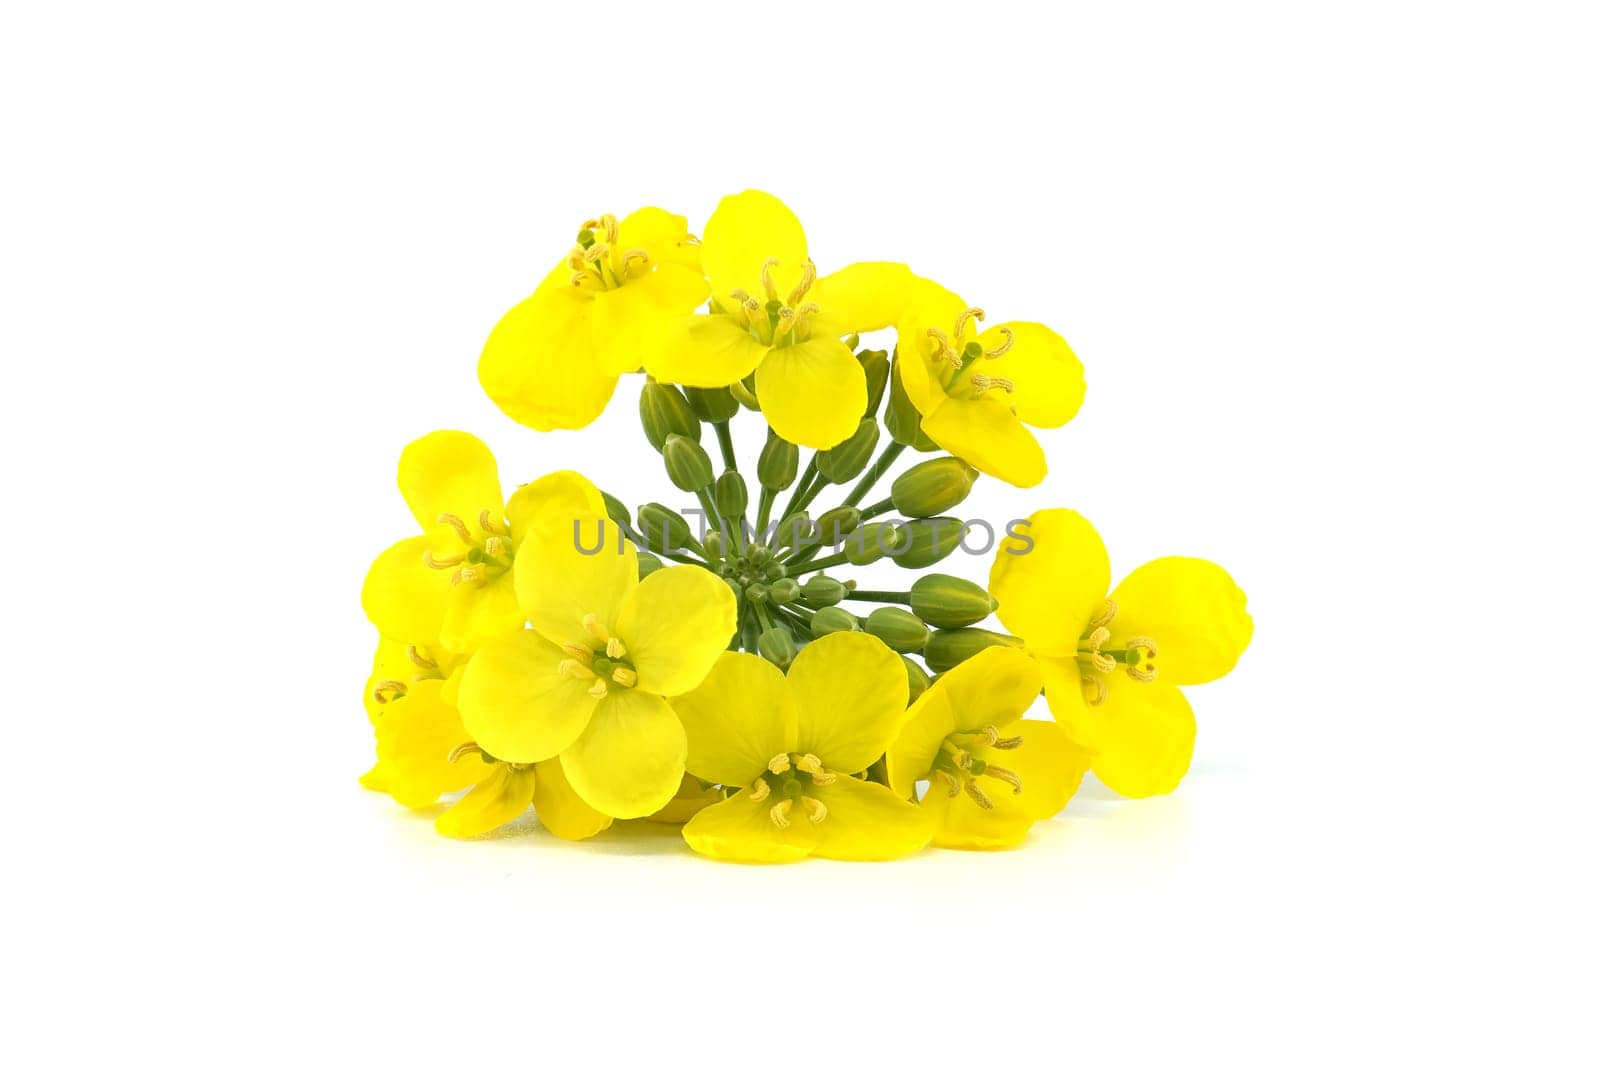 Yellow oilseed rape flowers isolated on white background by NetPix